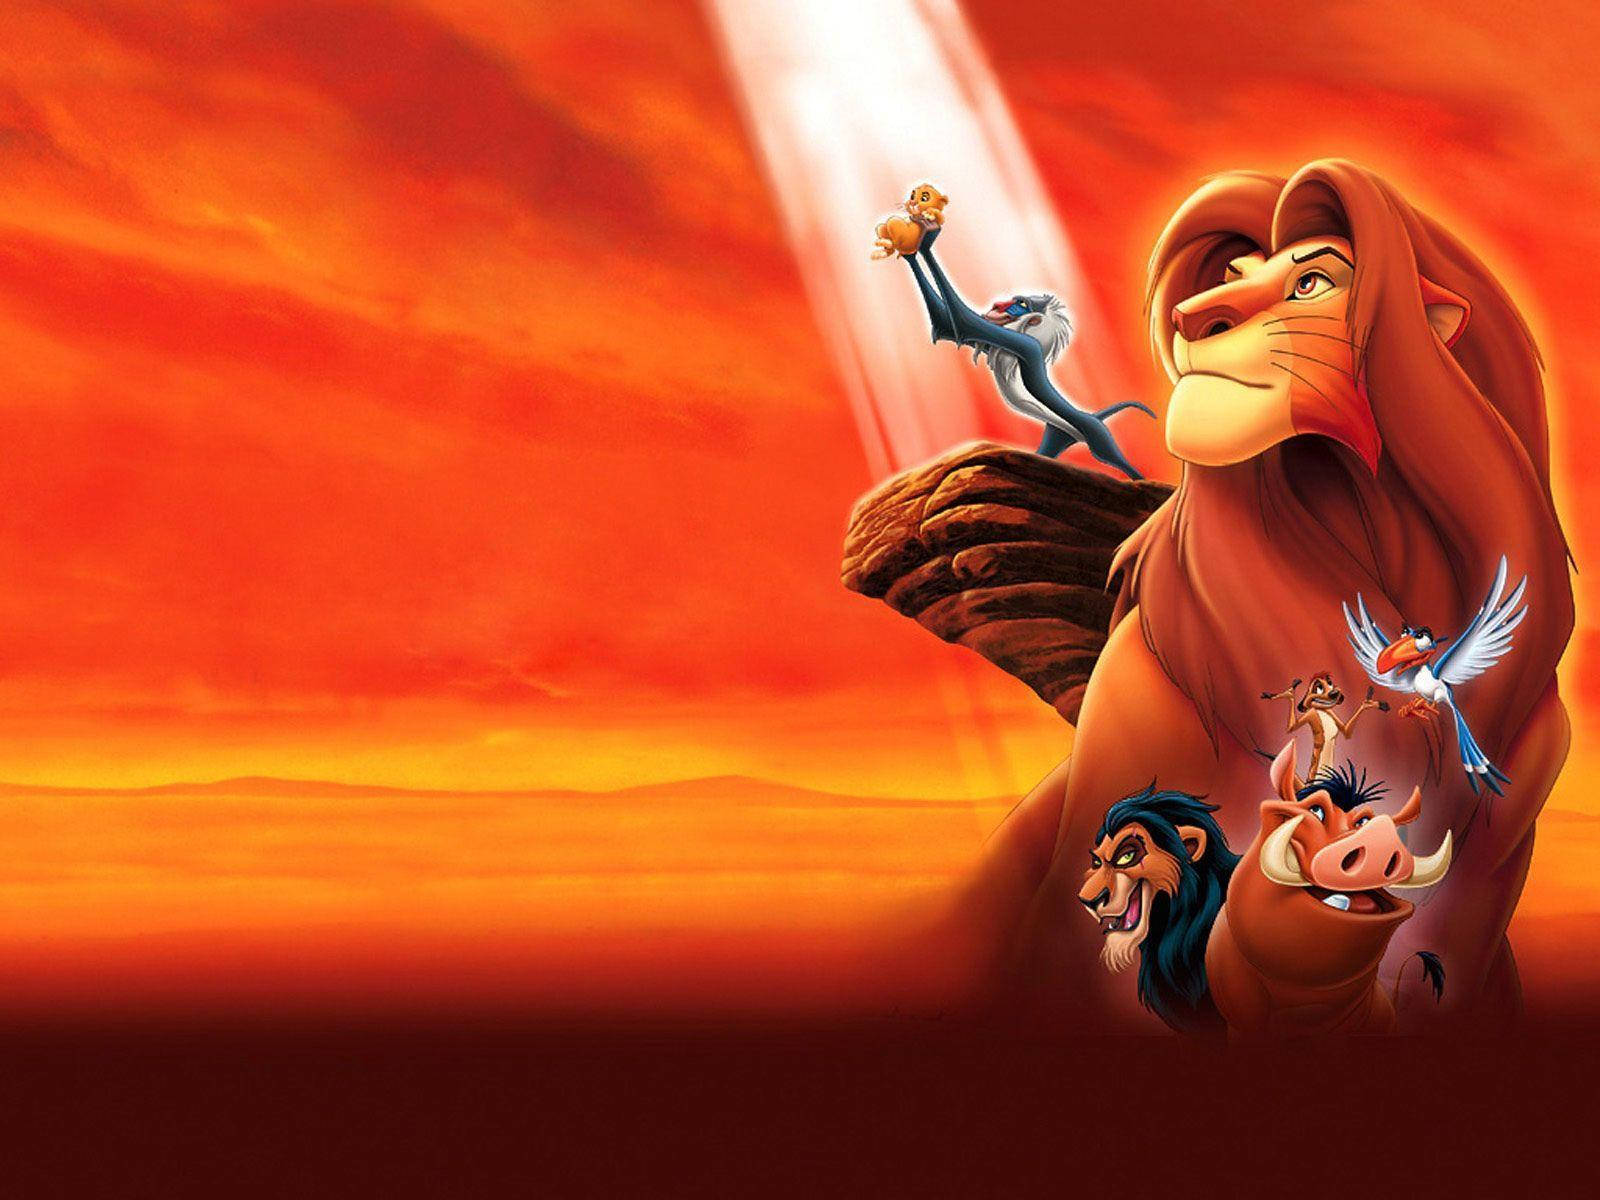 Disney's The Lion King characters art wallpaper